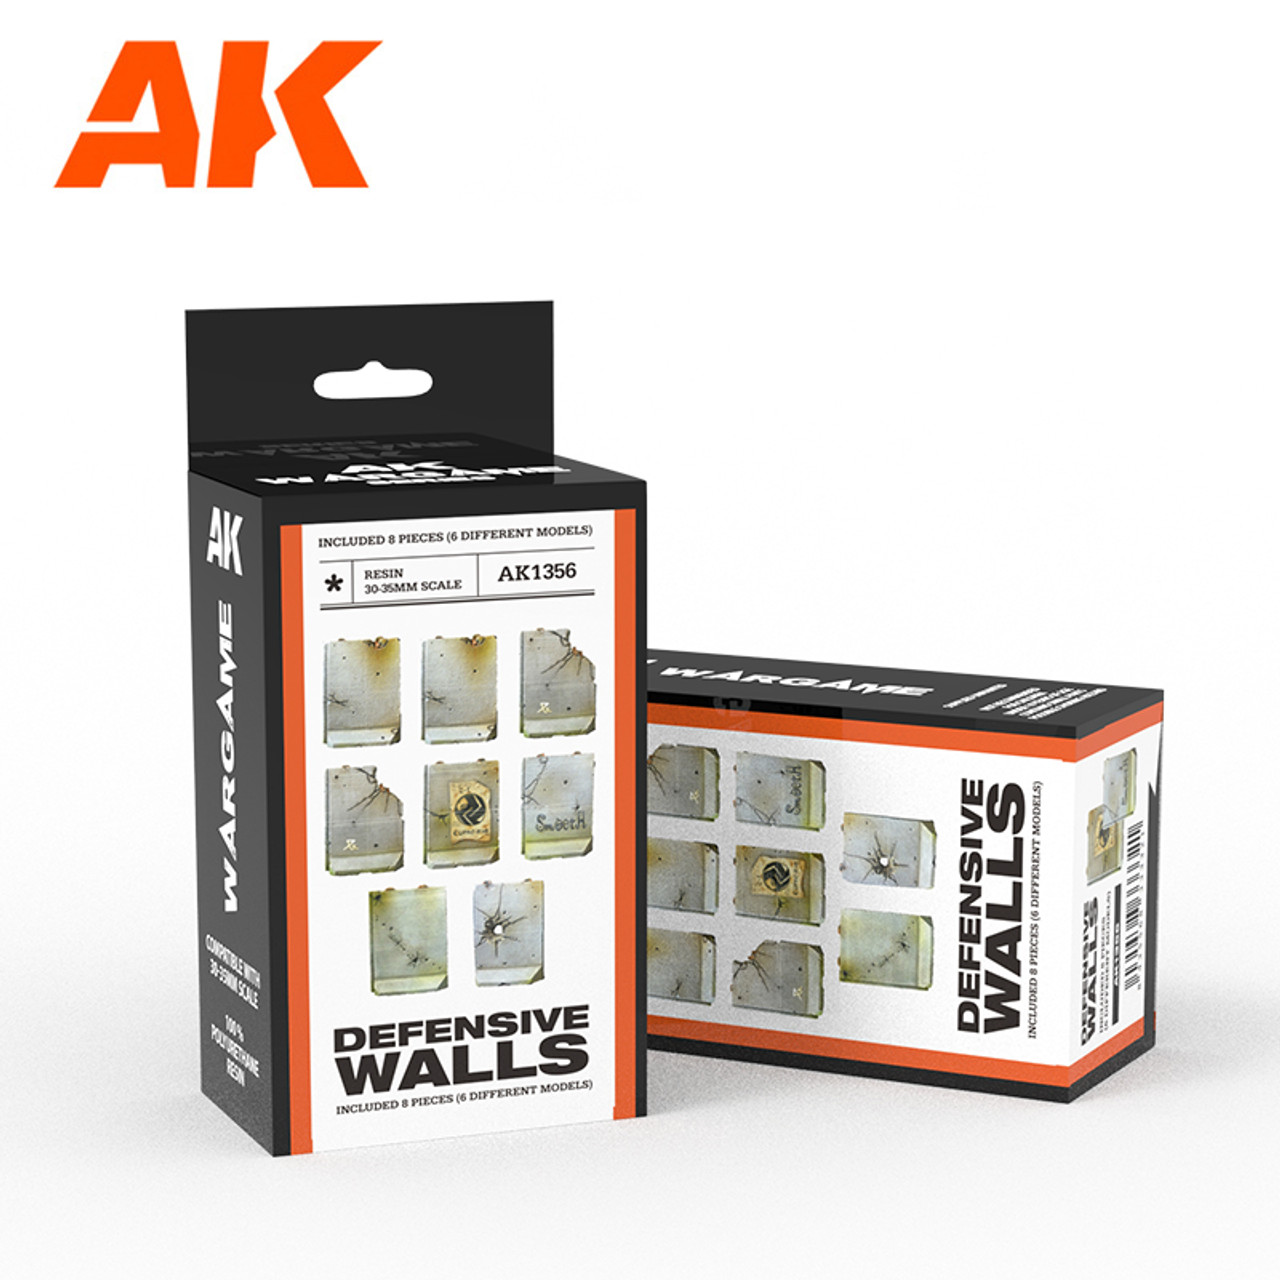 Defensive Walls (Poly-resin, 30-35mm scale)